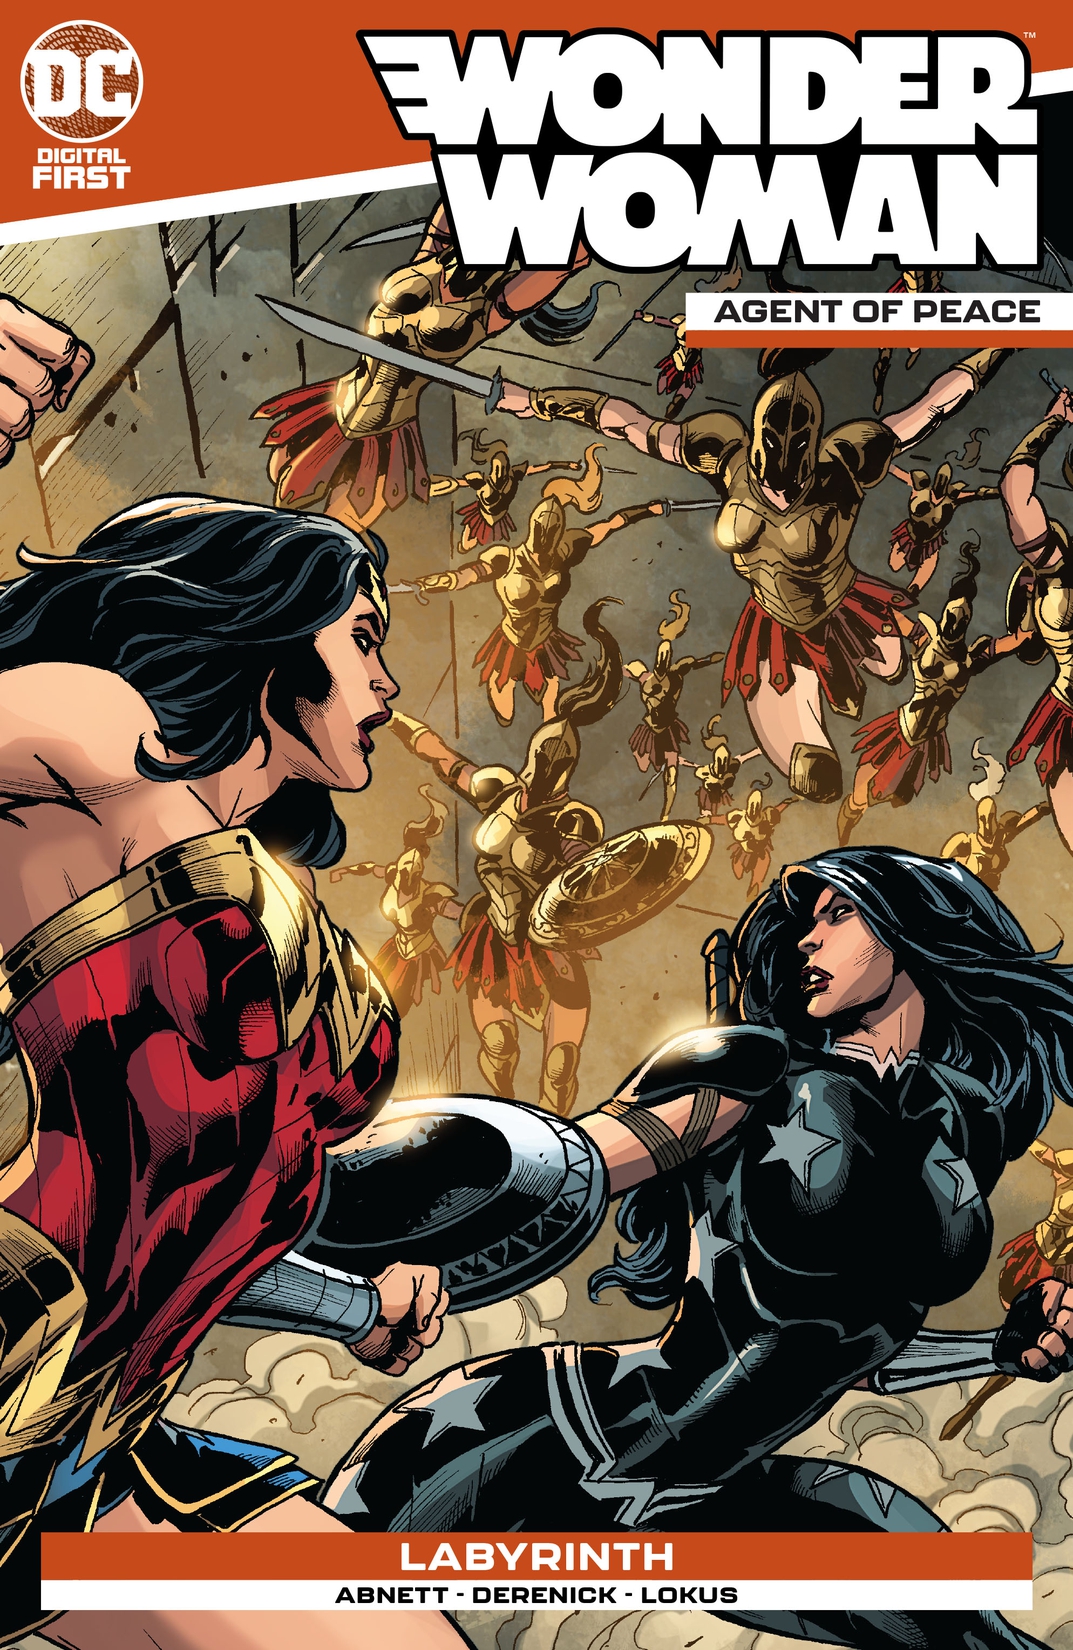 Wonder Woman: Agent of Peace #21 preview images